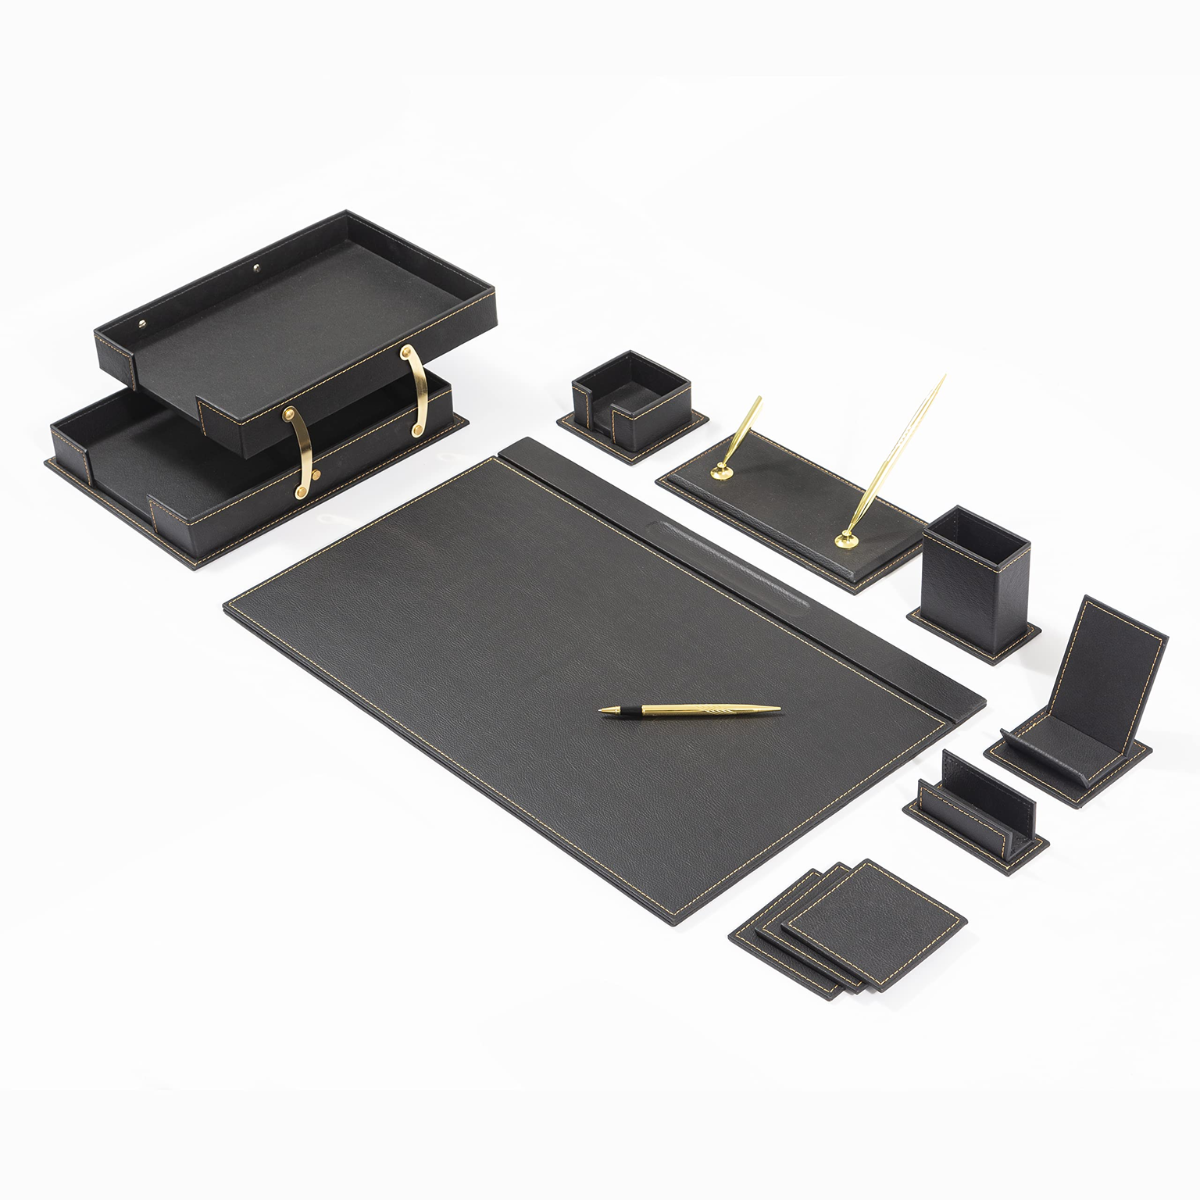 21. Upgrade His Desk Game with a Stylish Leather Desk Organizer Set